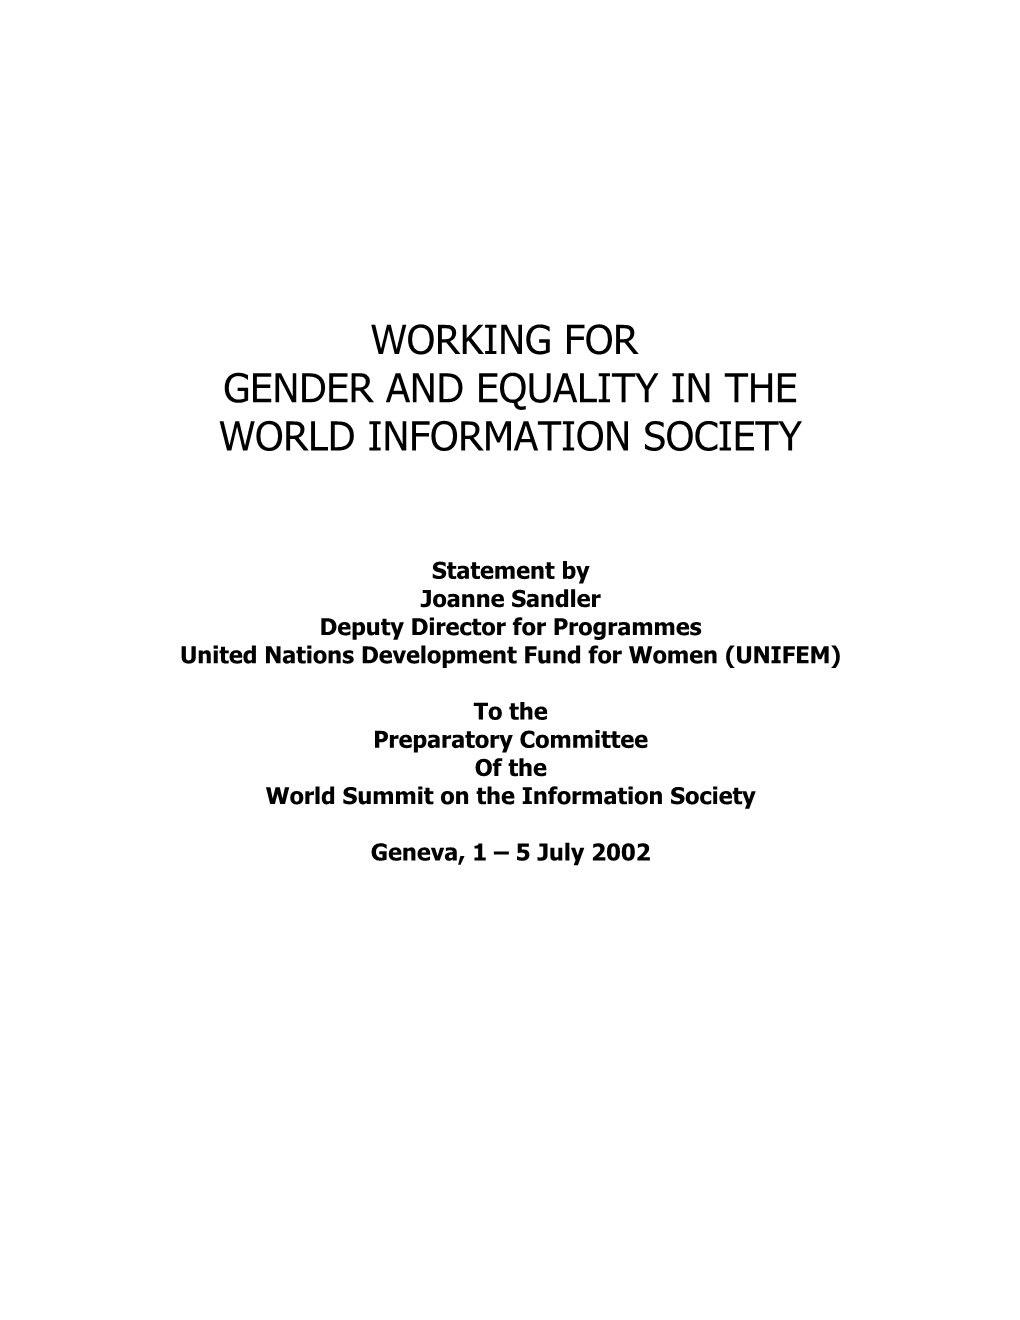 Gender and Equality in the World Information Society